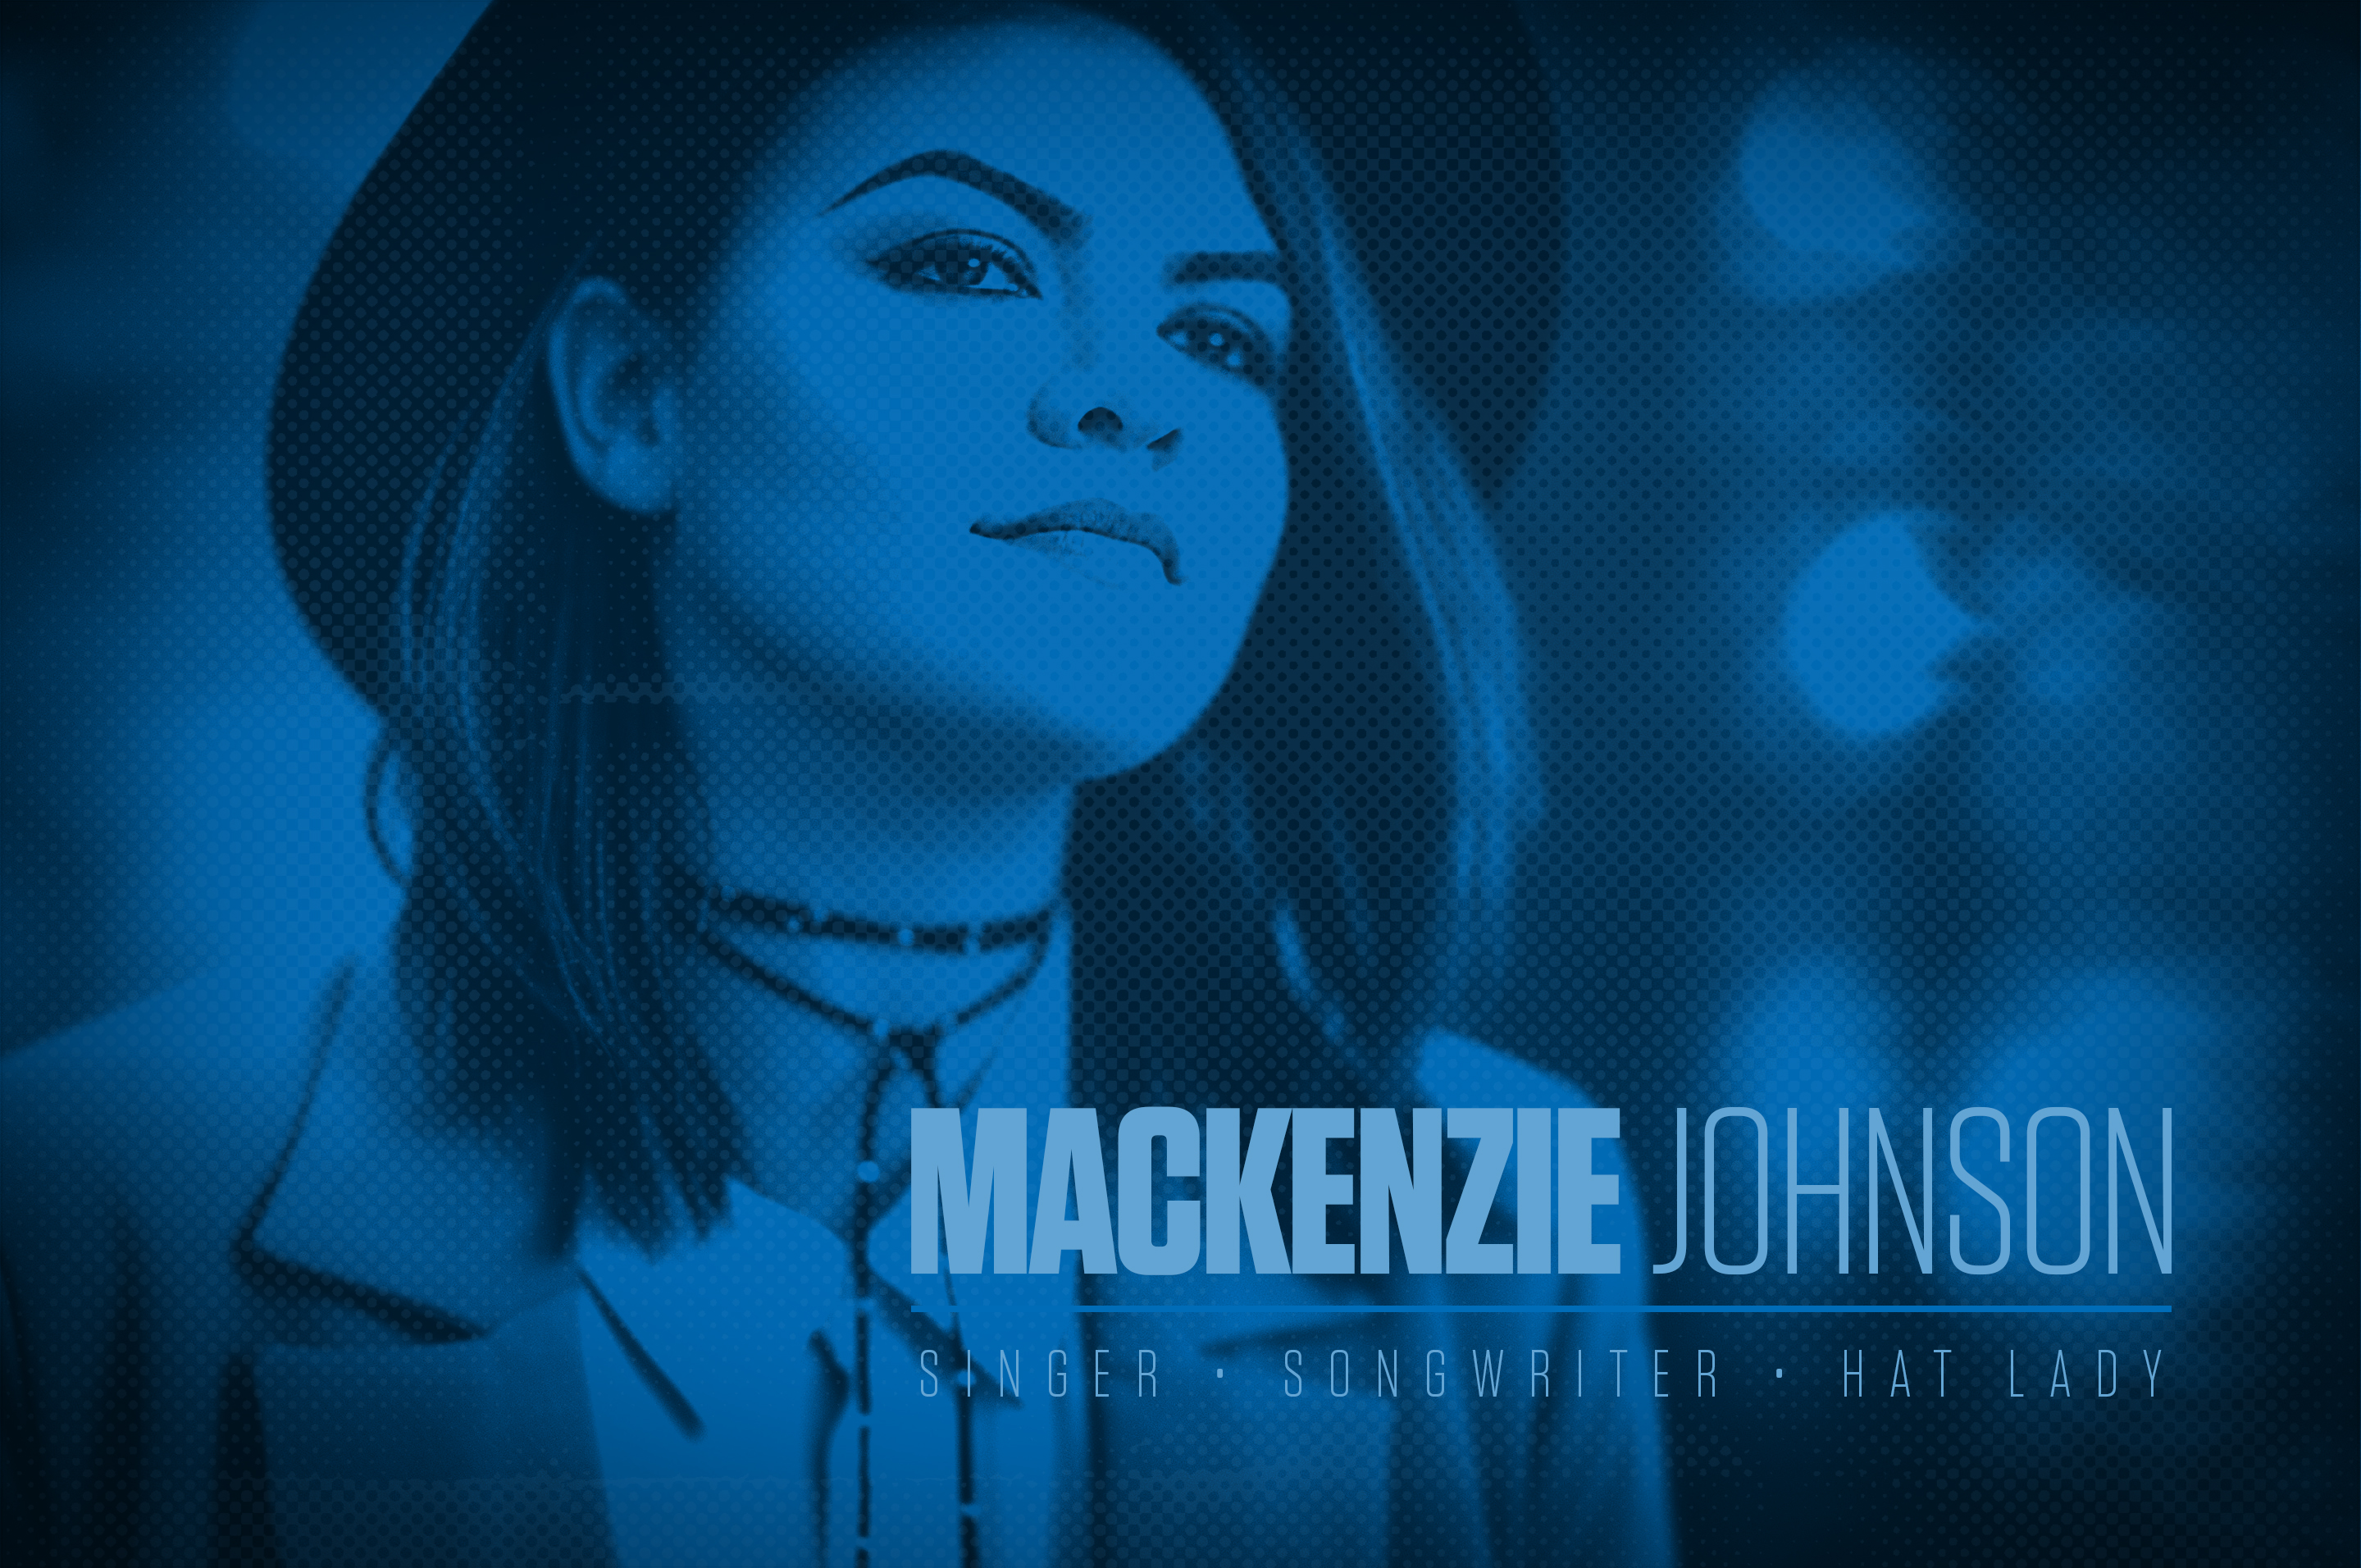 I Did It My Way: Behind the Scenes of Mackenzie Johnson's YouTube Channel